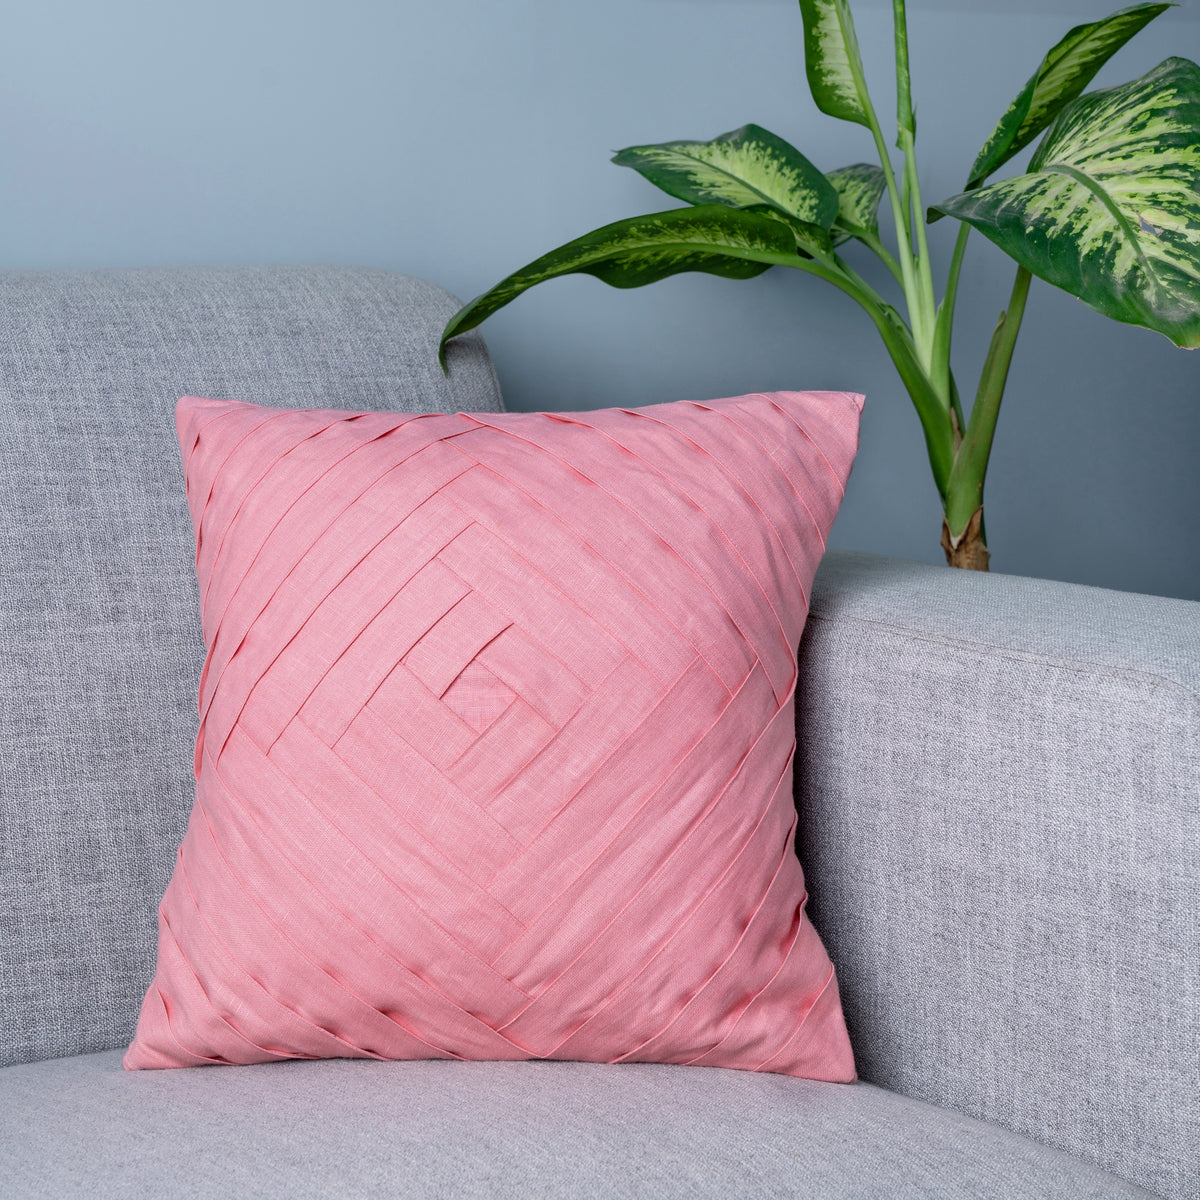 Dusty Pink Square Design Square Cushion Cover | Set of 4